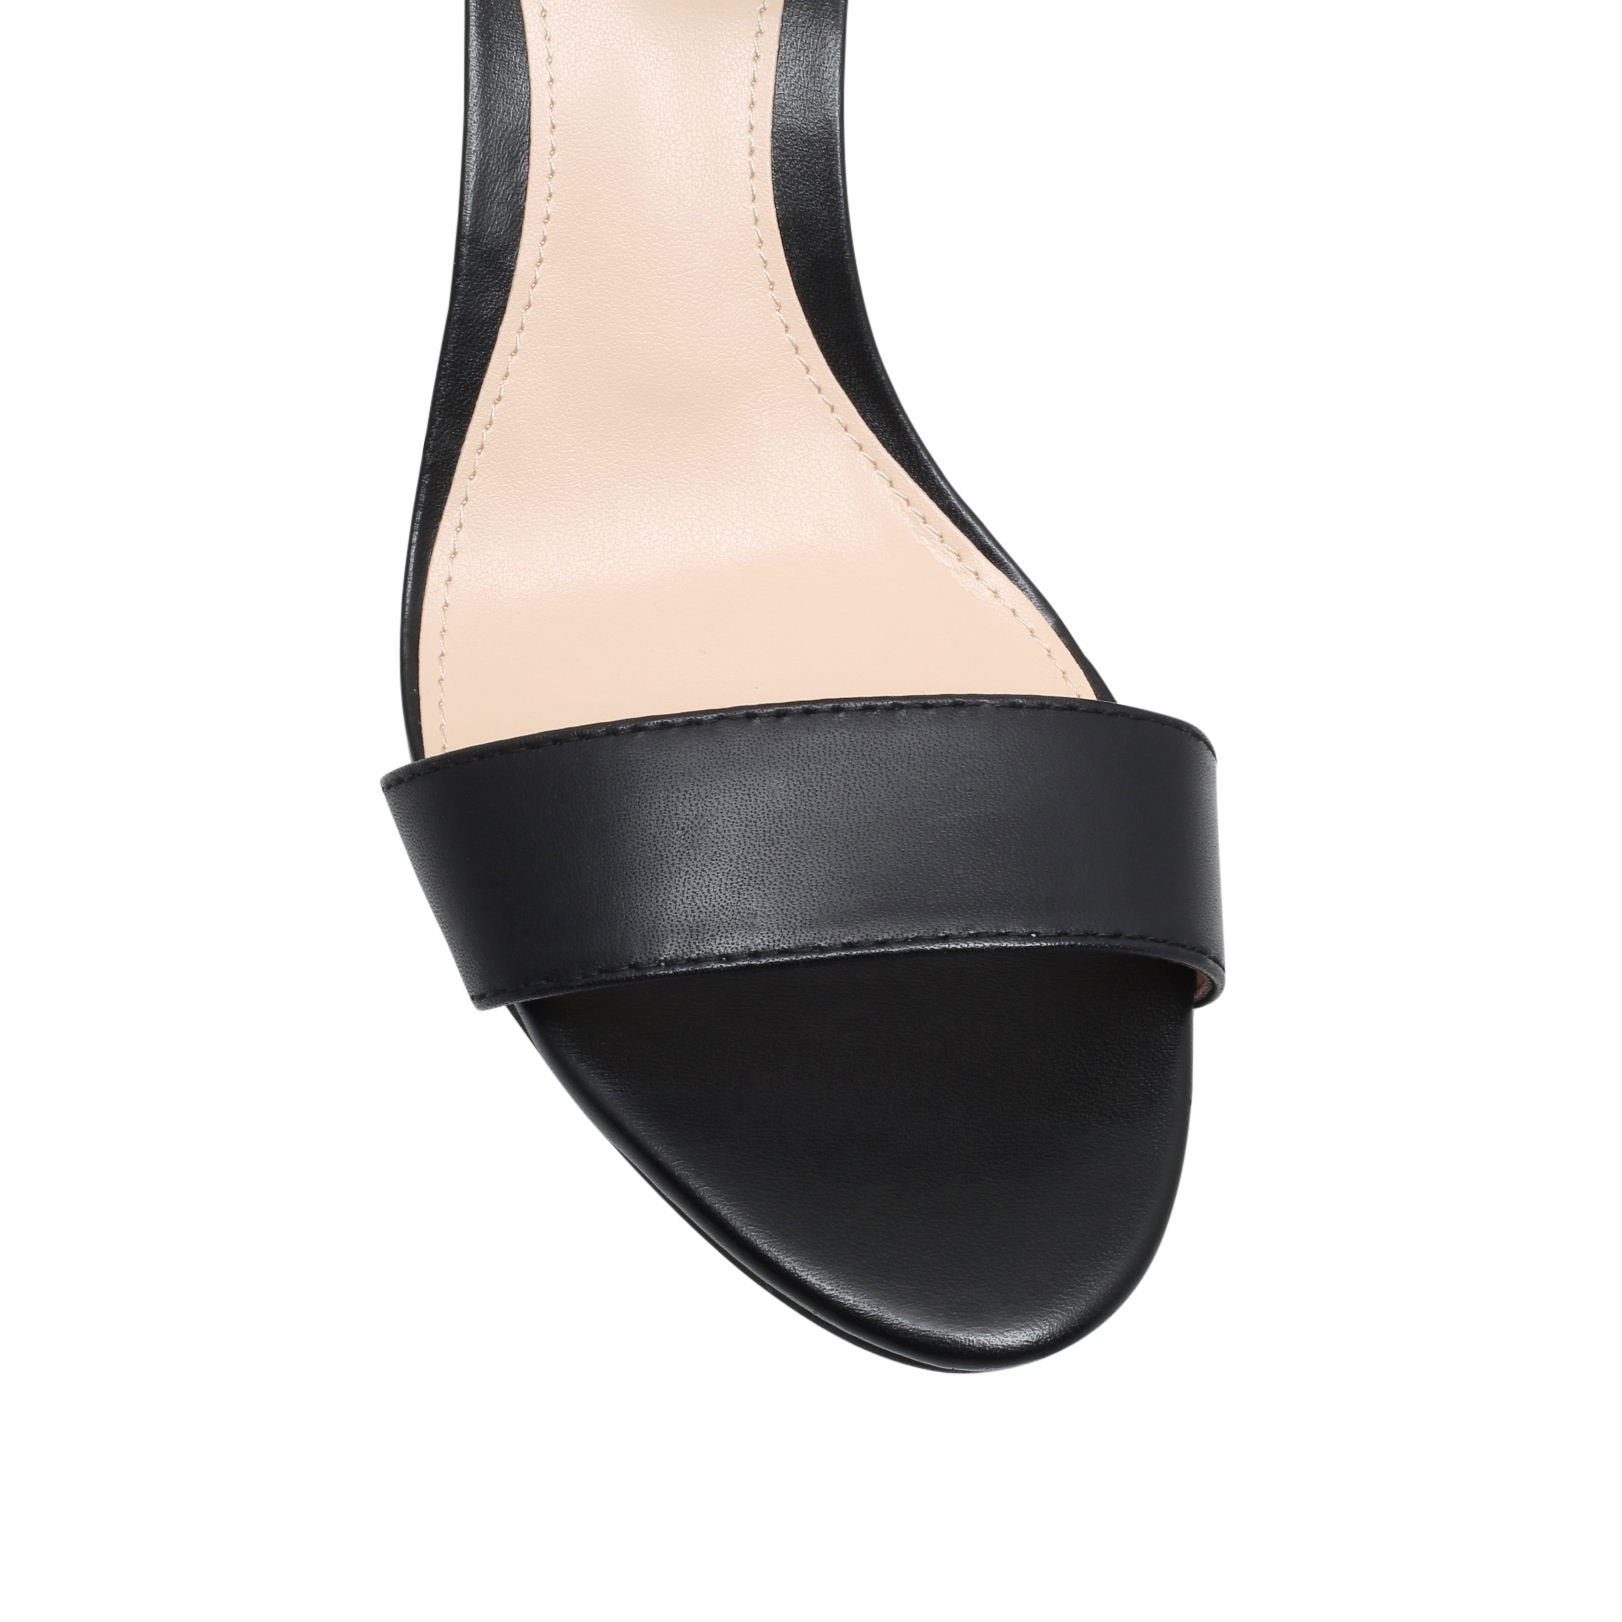 Vince Camuto | MISHA Black Mid Heel Sandals by VINCE CAMUTO